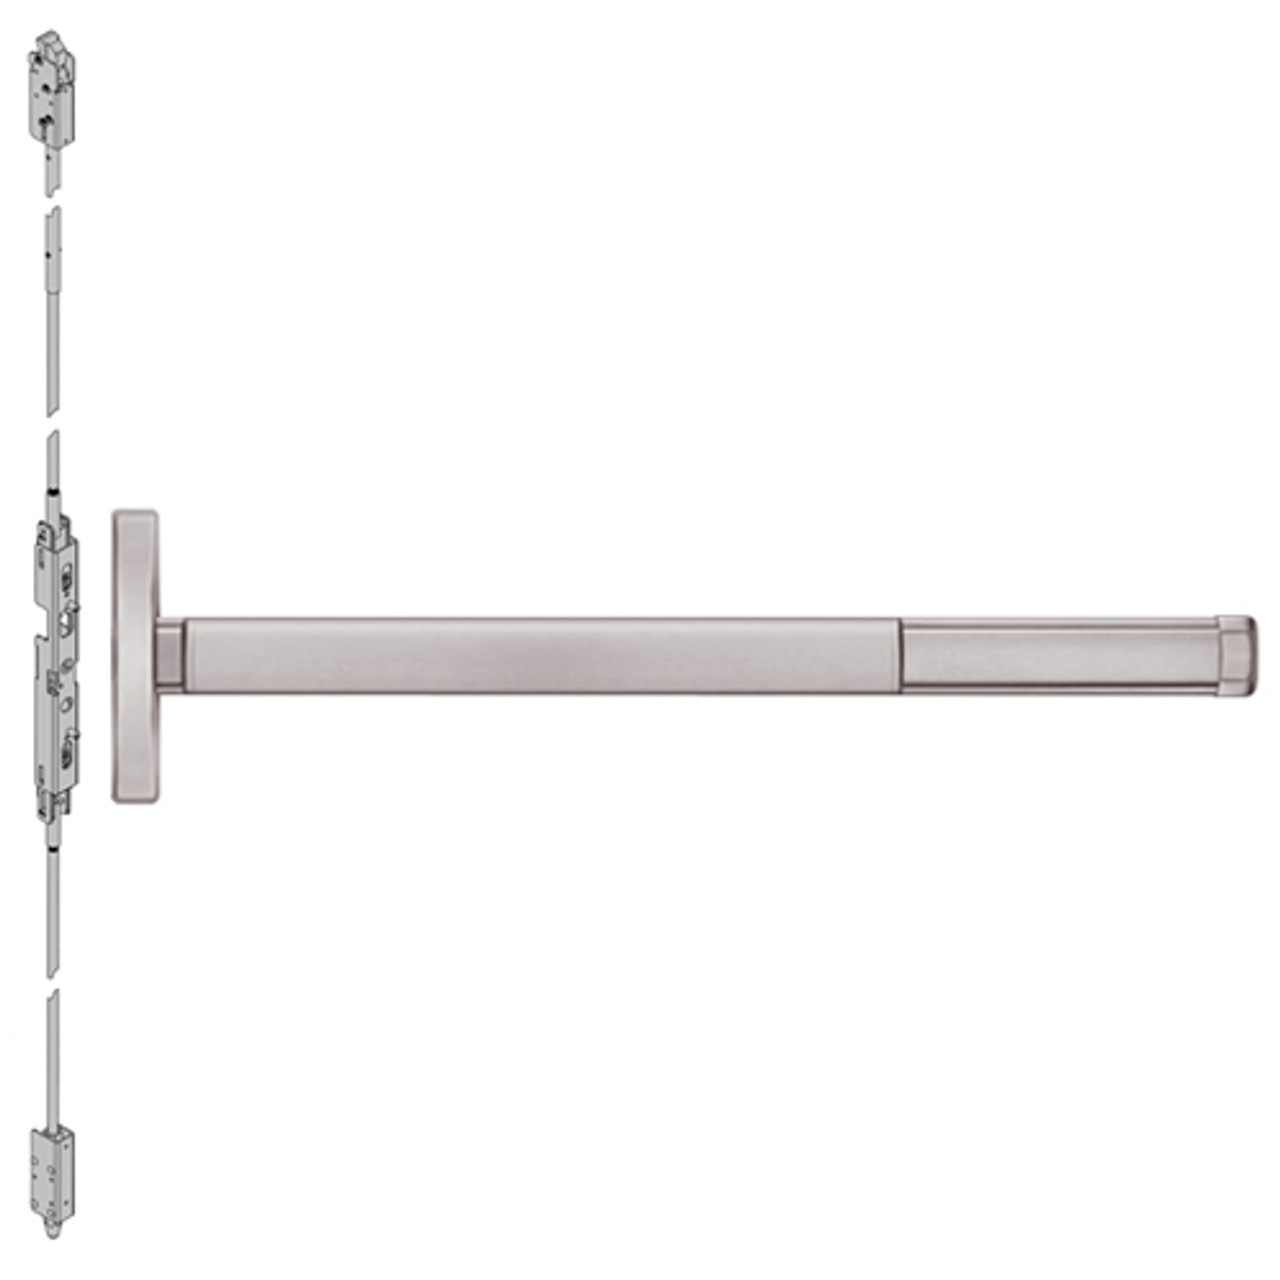 FL2608-628-36 PHI 2600 Series Fire Rated Concealed Vertical Rod Exit Device Prepped for Key Controls Lever in Satin Aluminum Finish